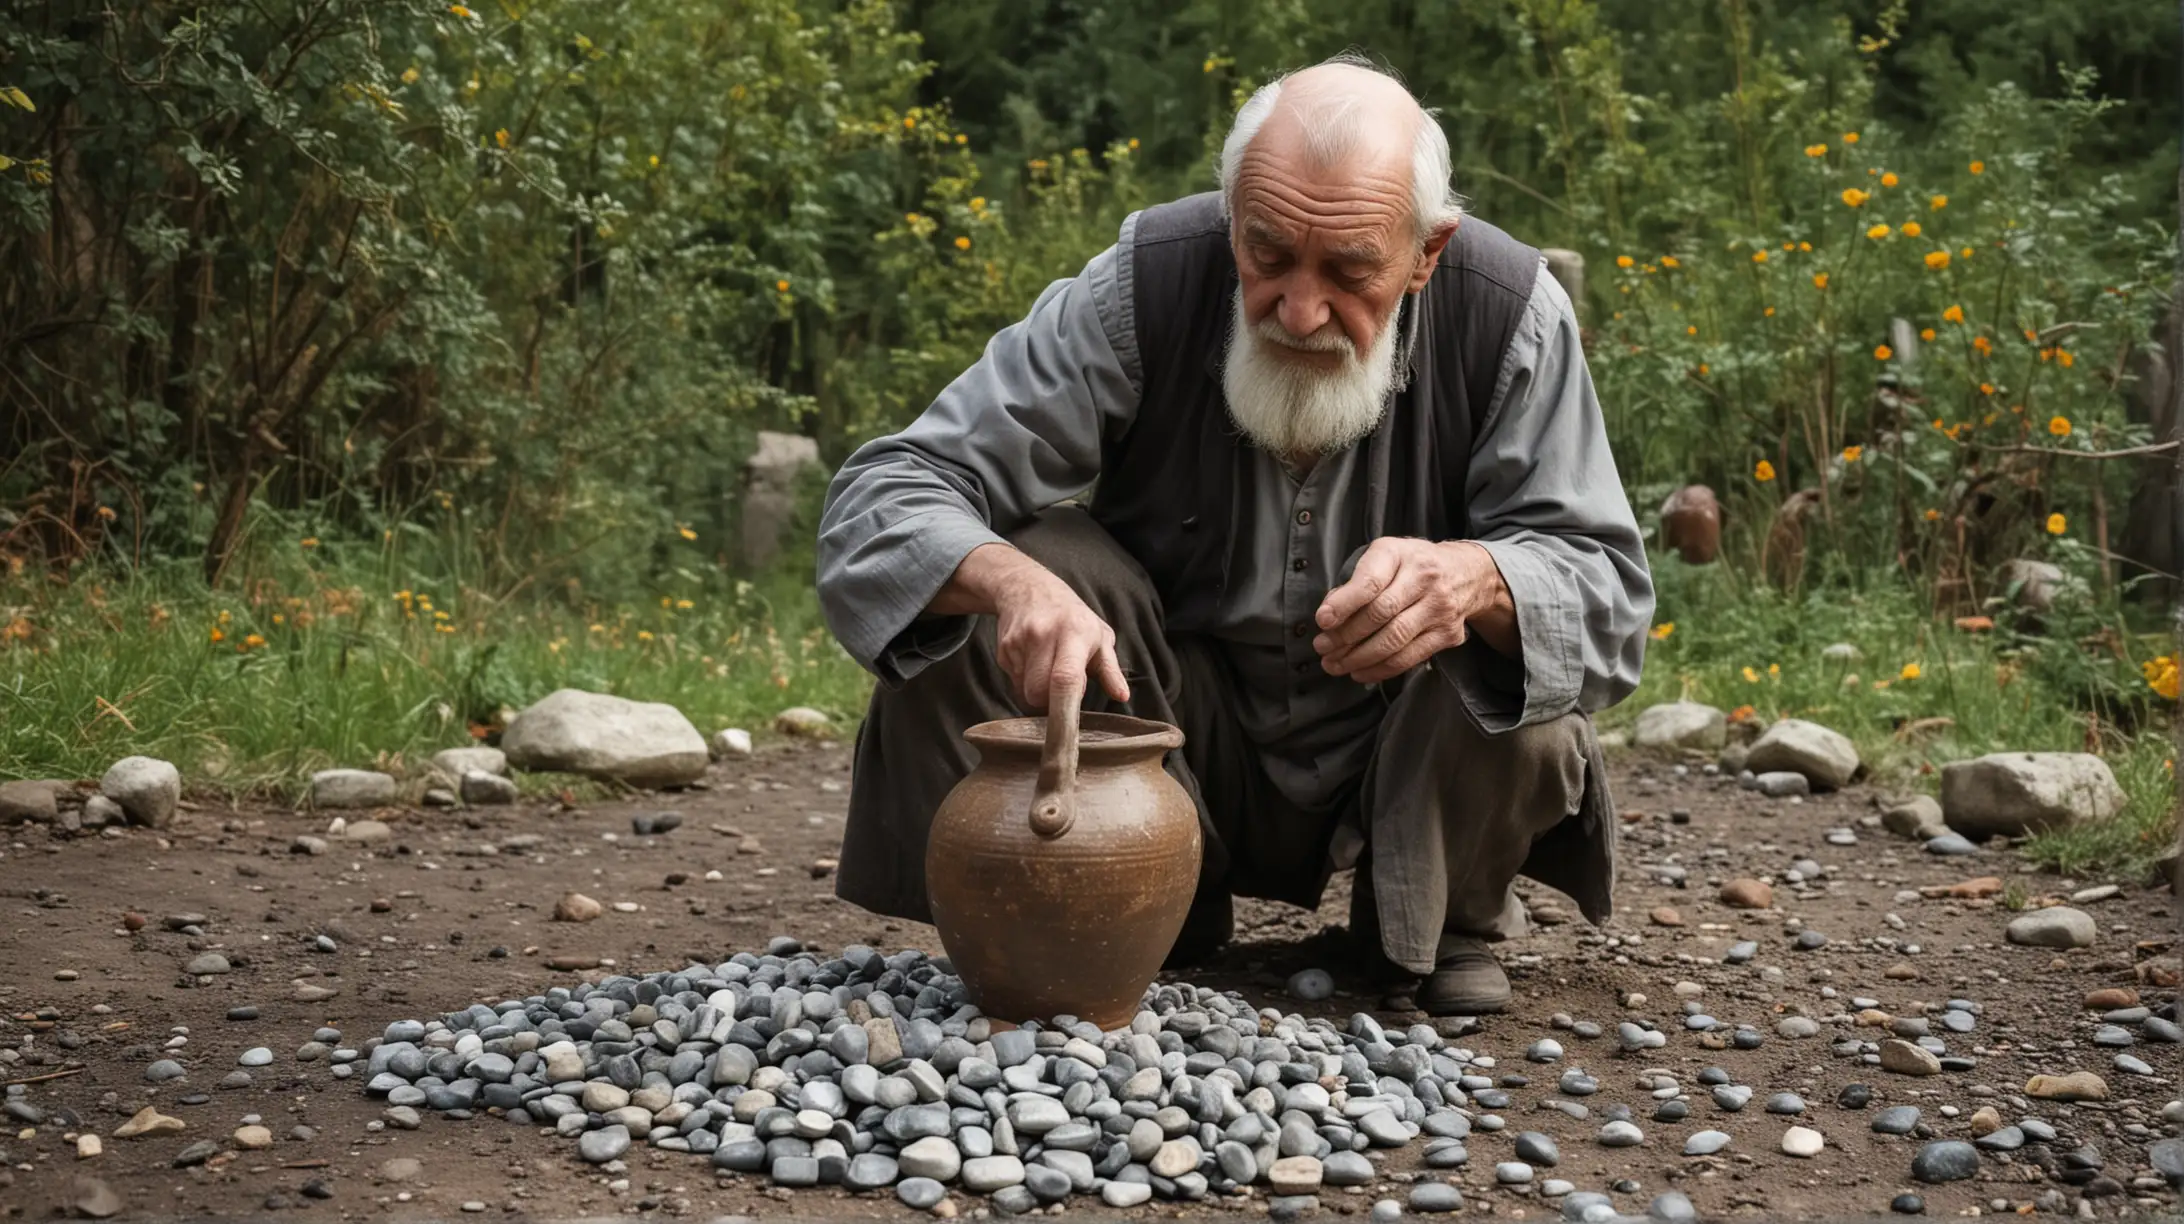 Elderly Man Pouring Small Stones into Jug of Large Stones